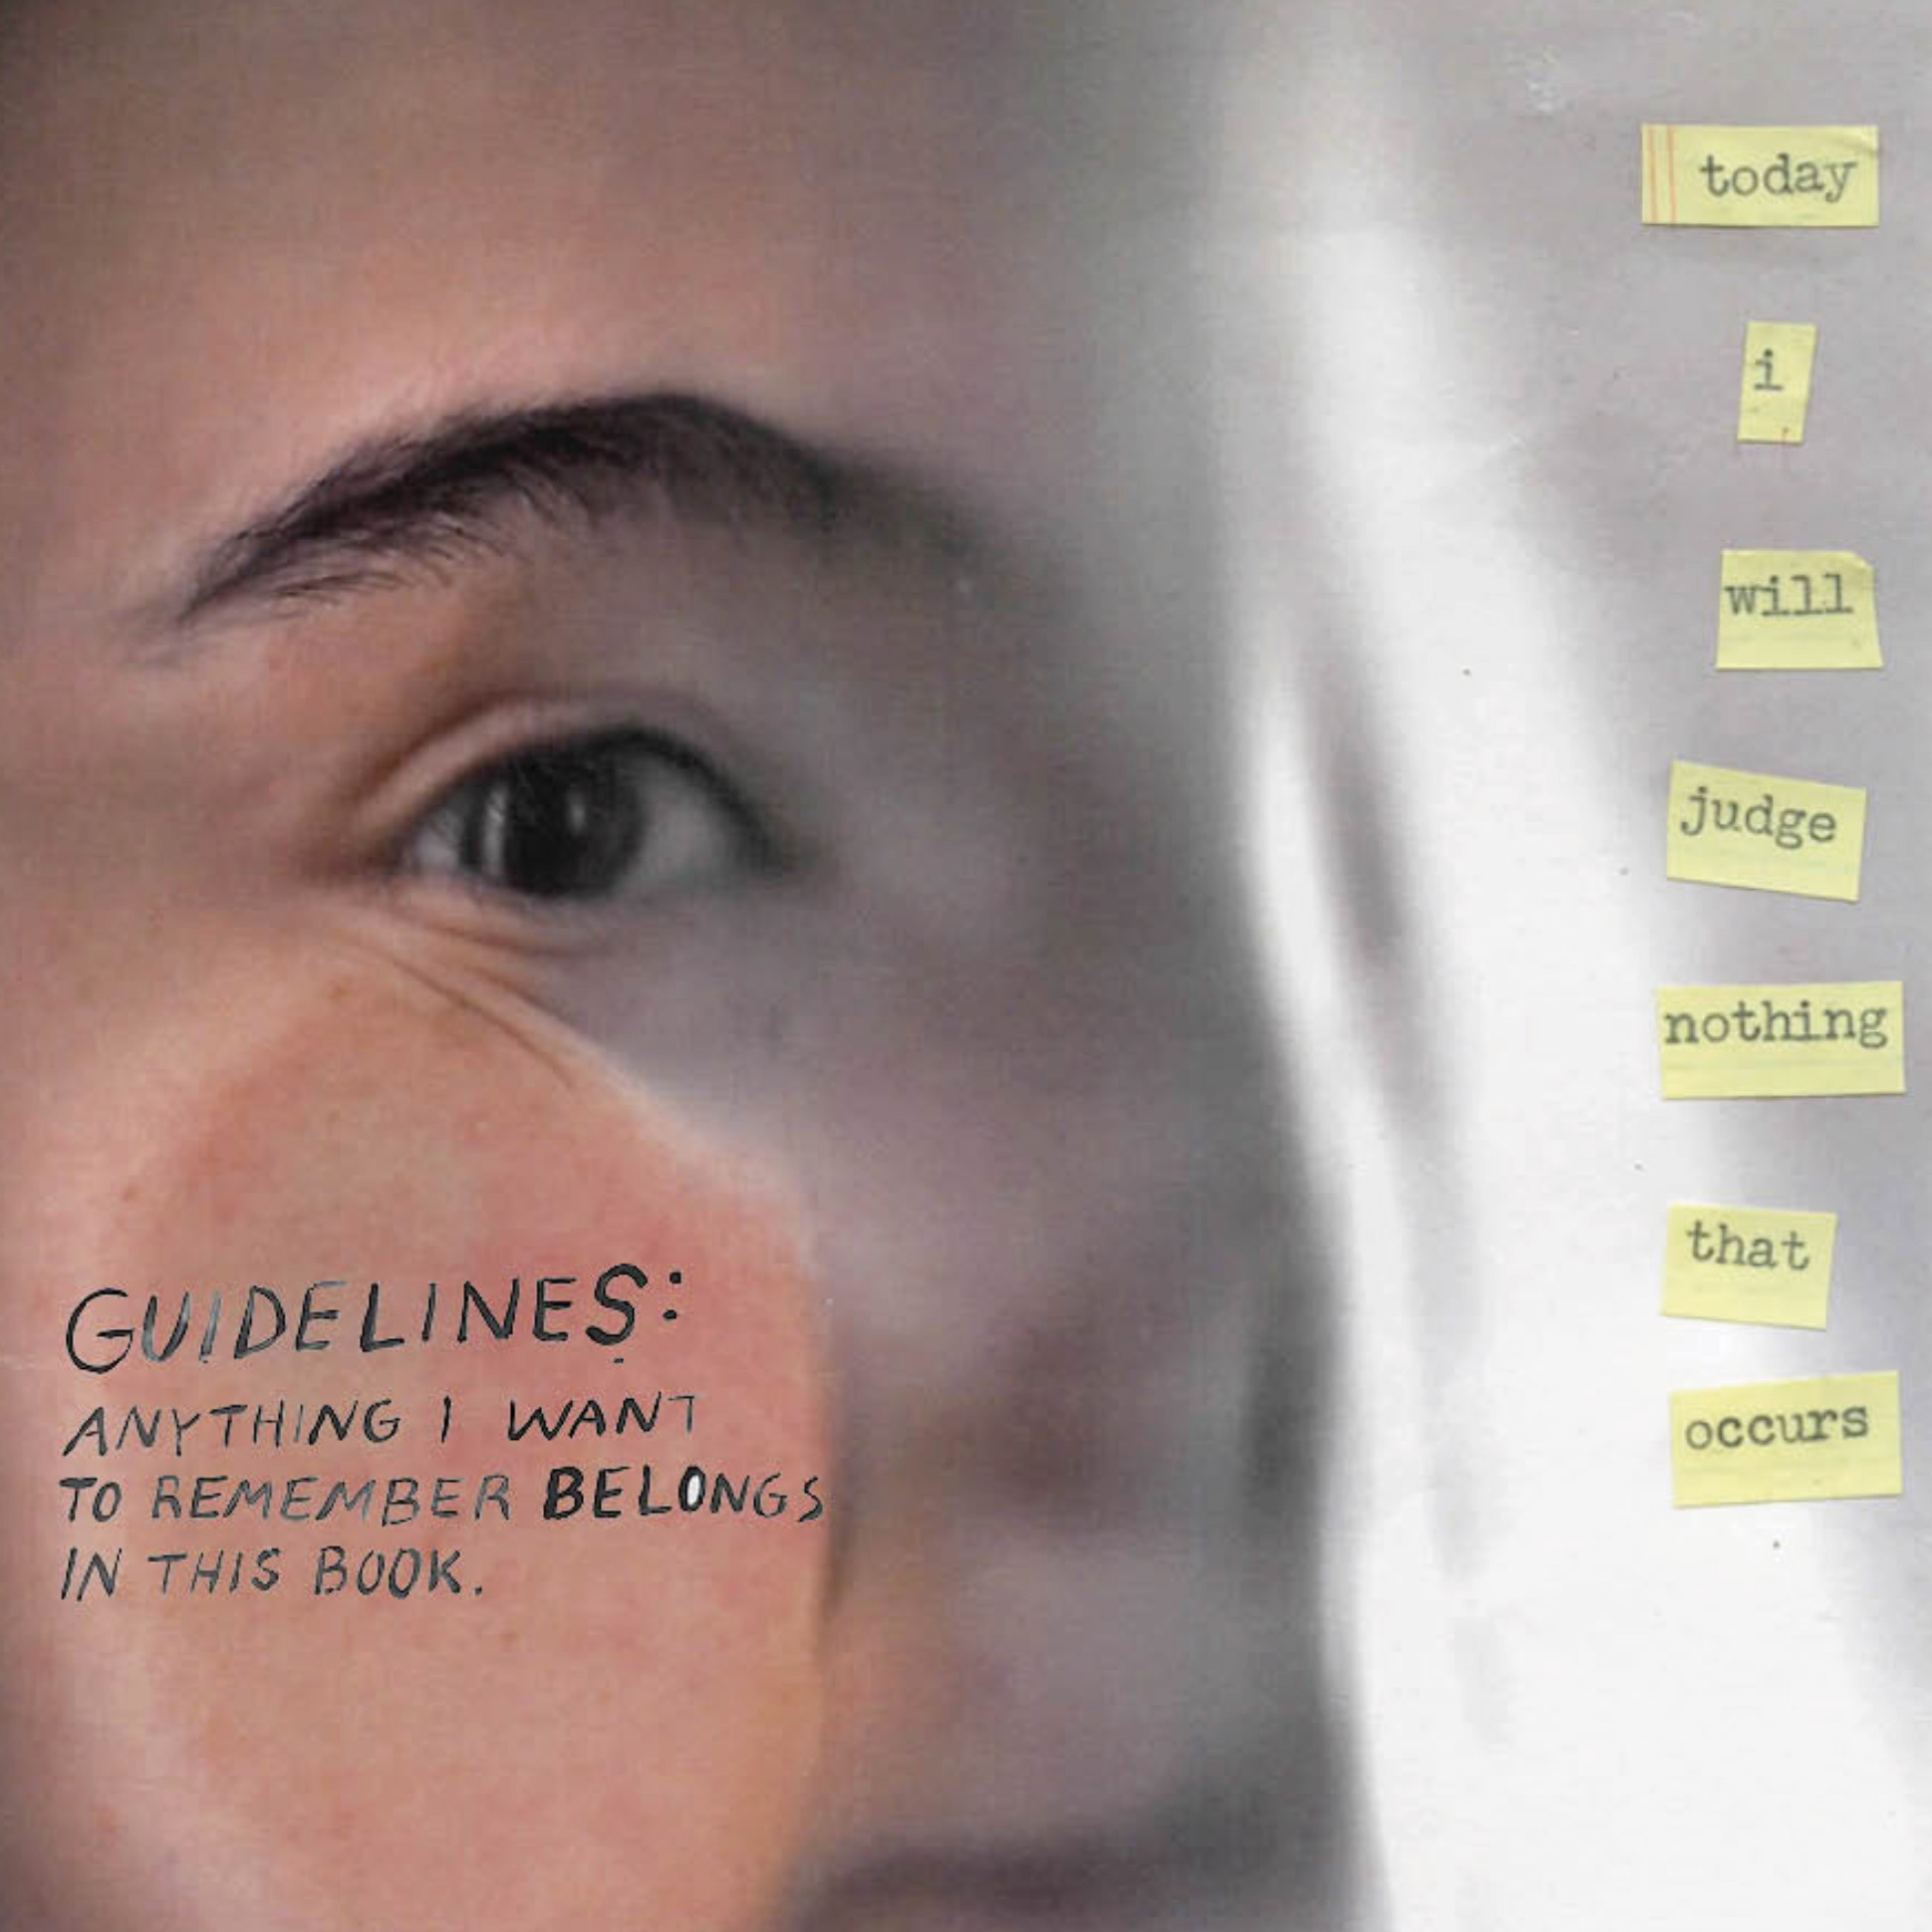 Book cover, profile of a face pressed against a scanner. Includes text "Today I will judge nothing that occurs"